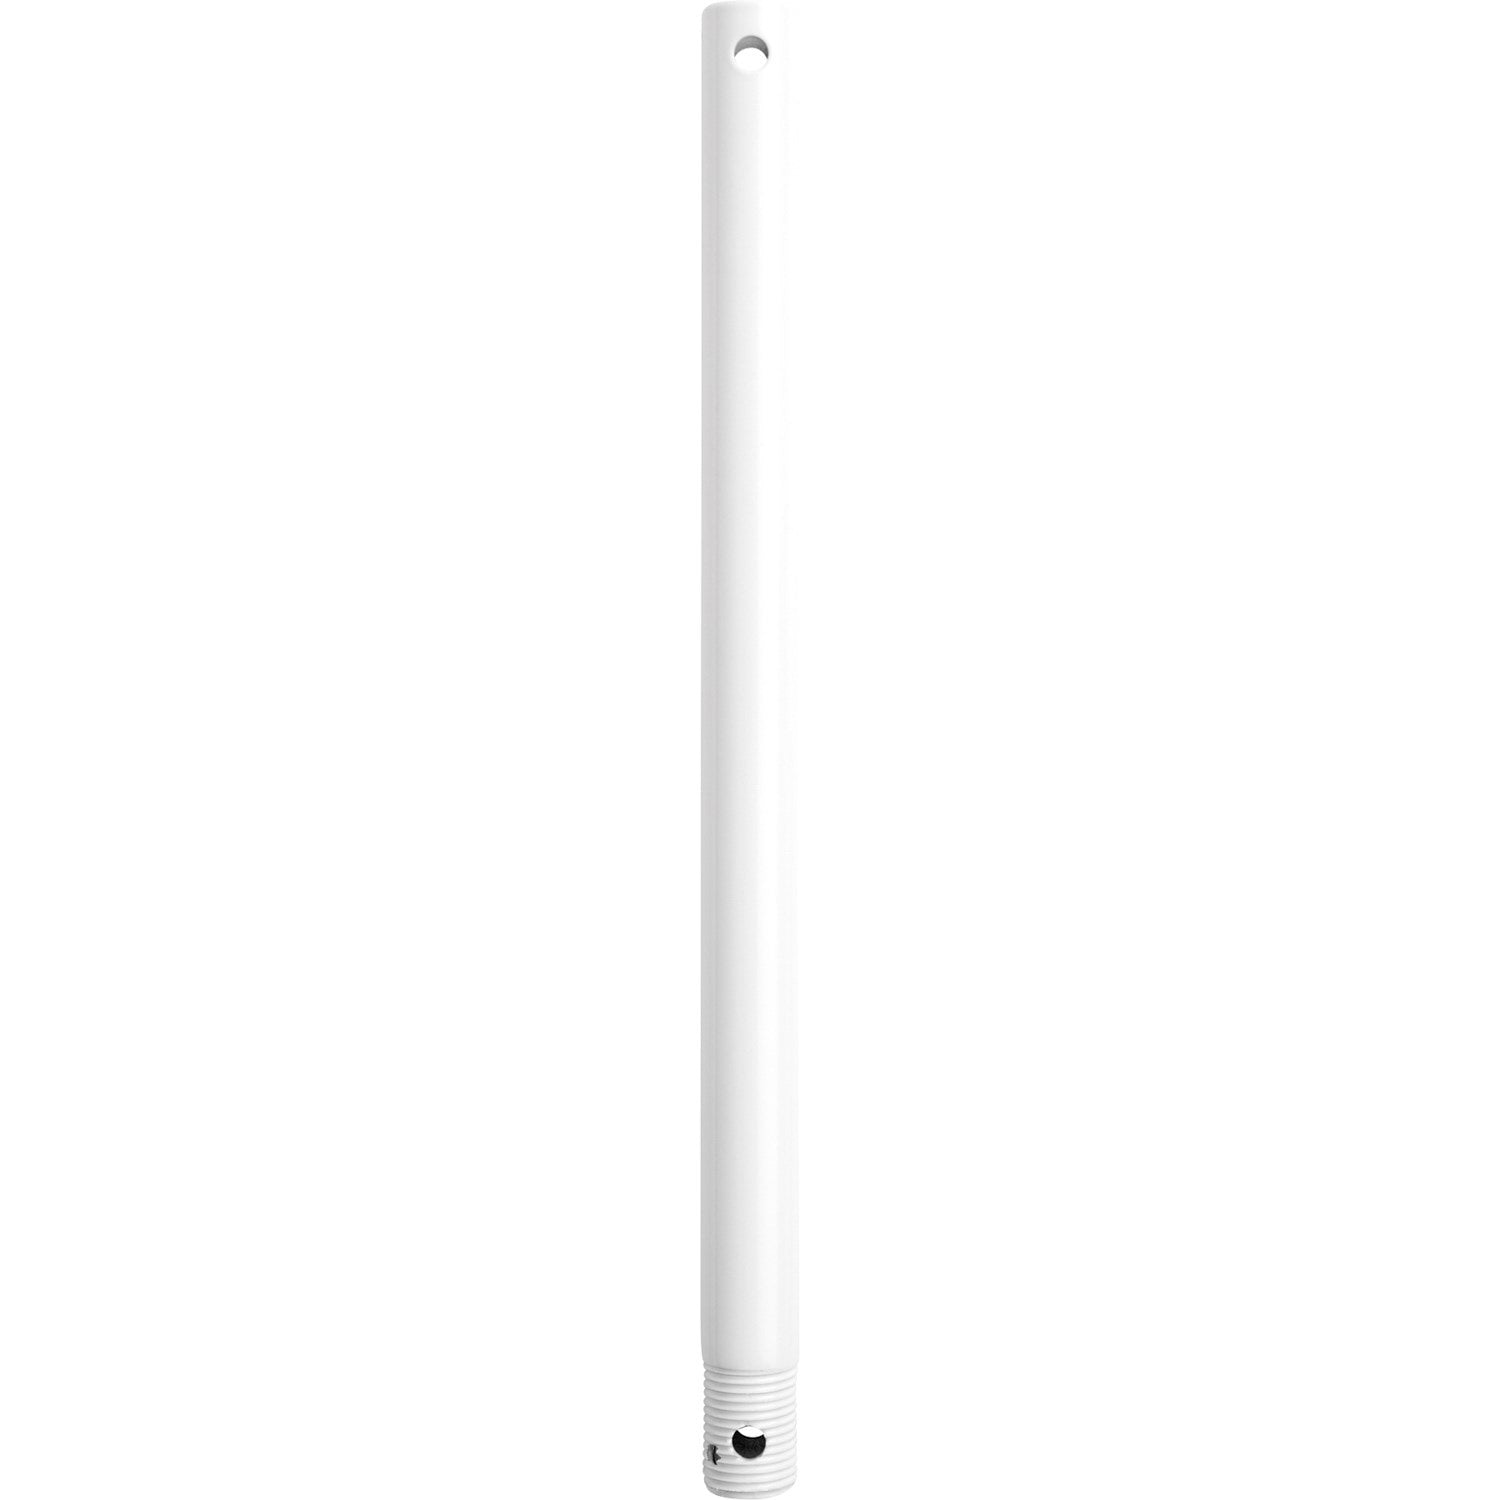 Quorum - 6-126 - Downrod - 12 in. Downrods - White